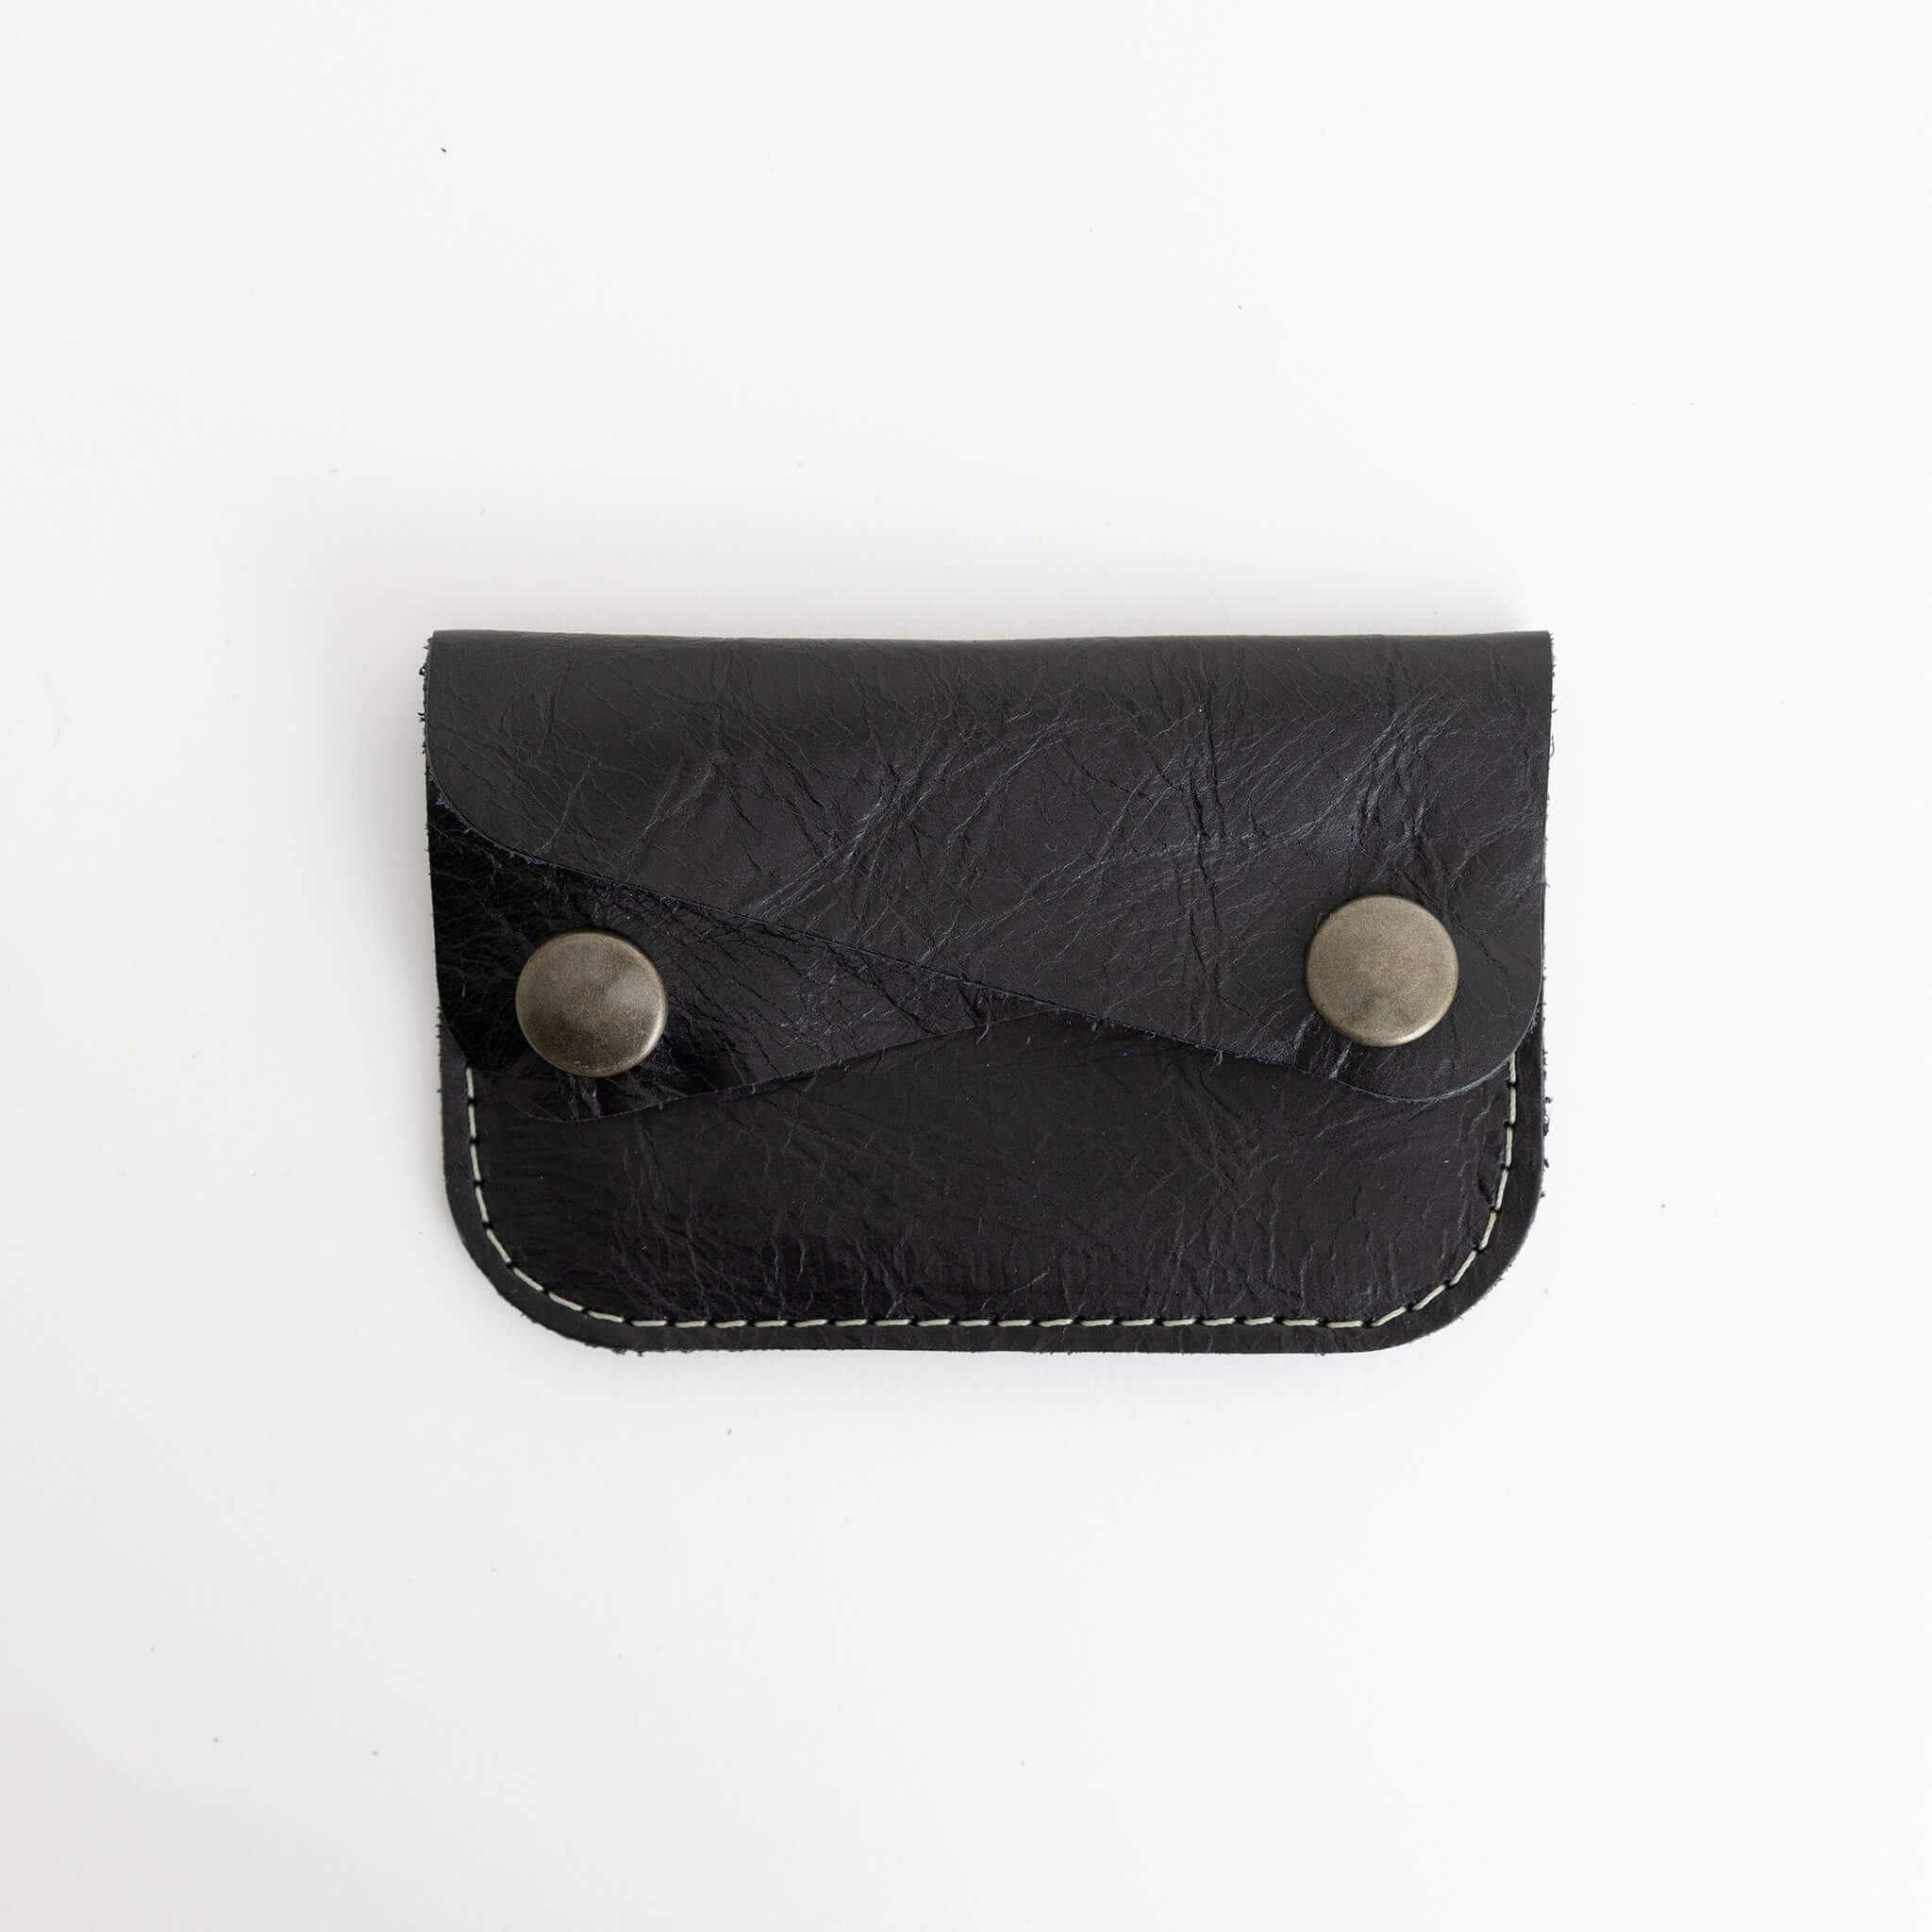 river card wallet - unisex double snap - handmade leather - black front view